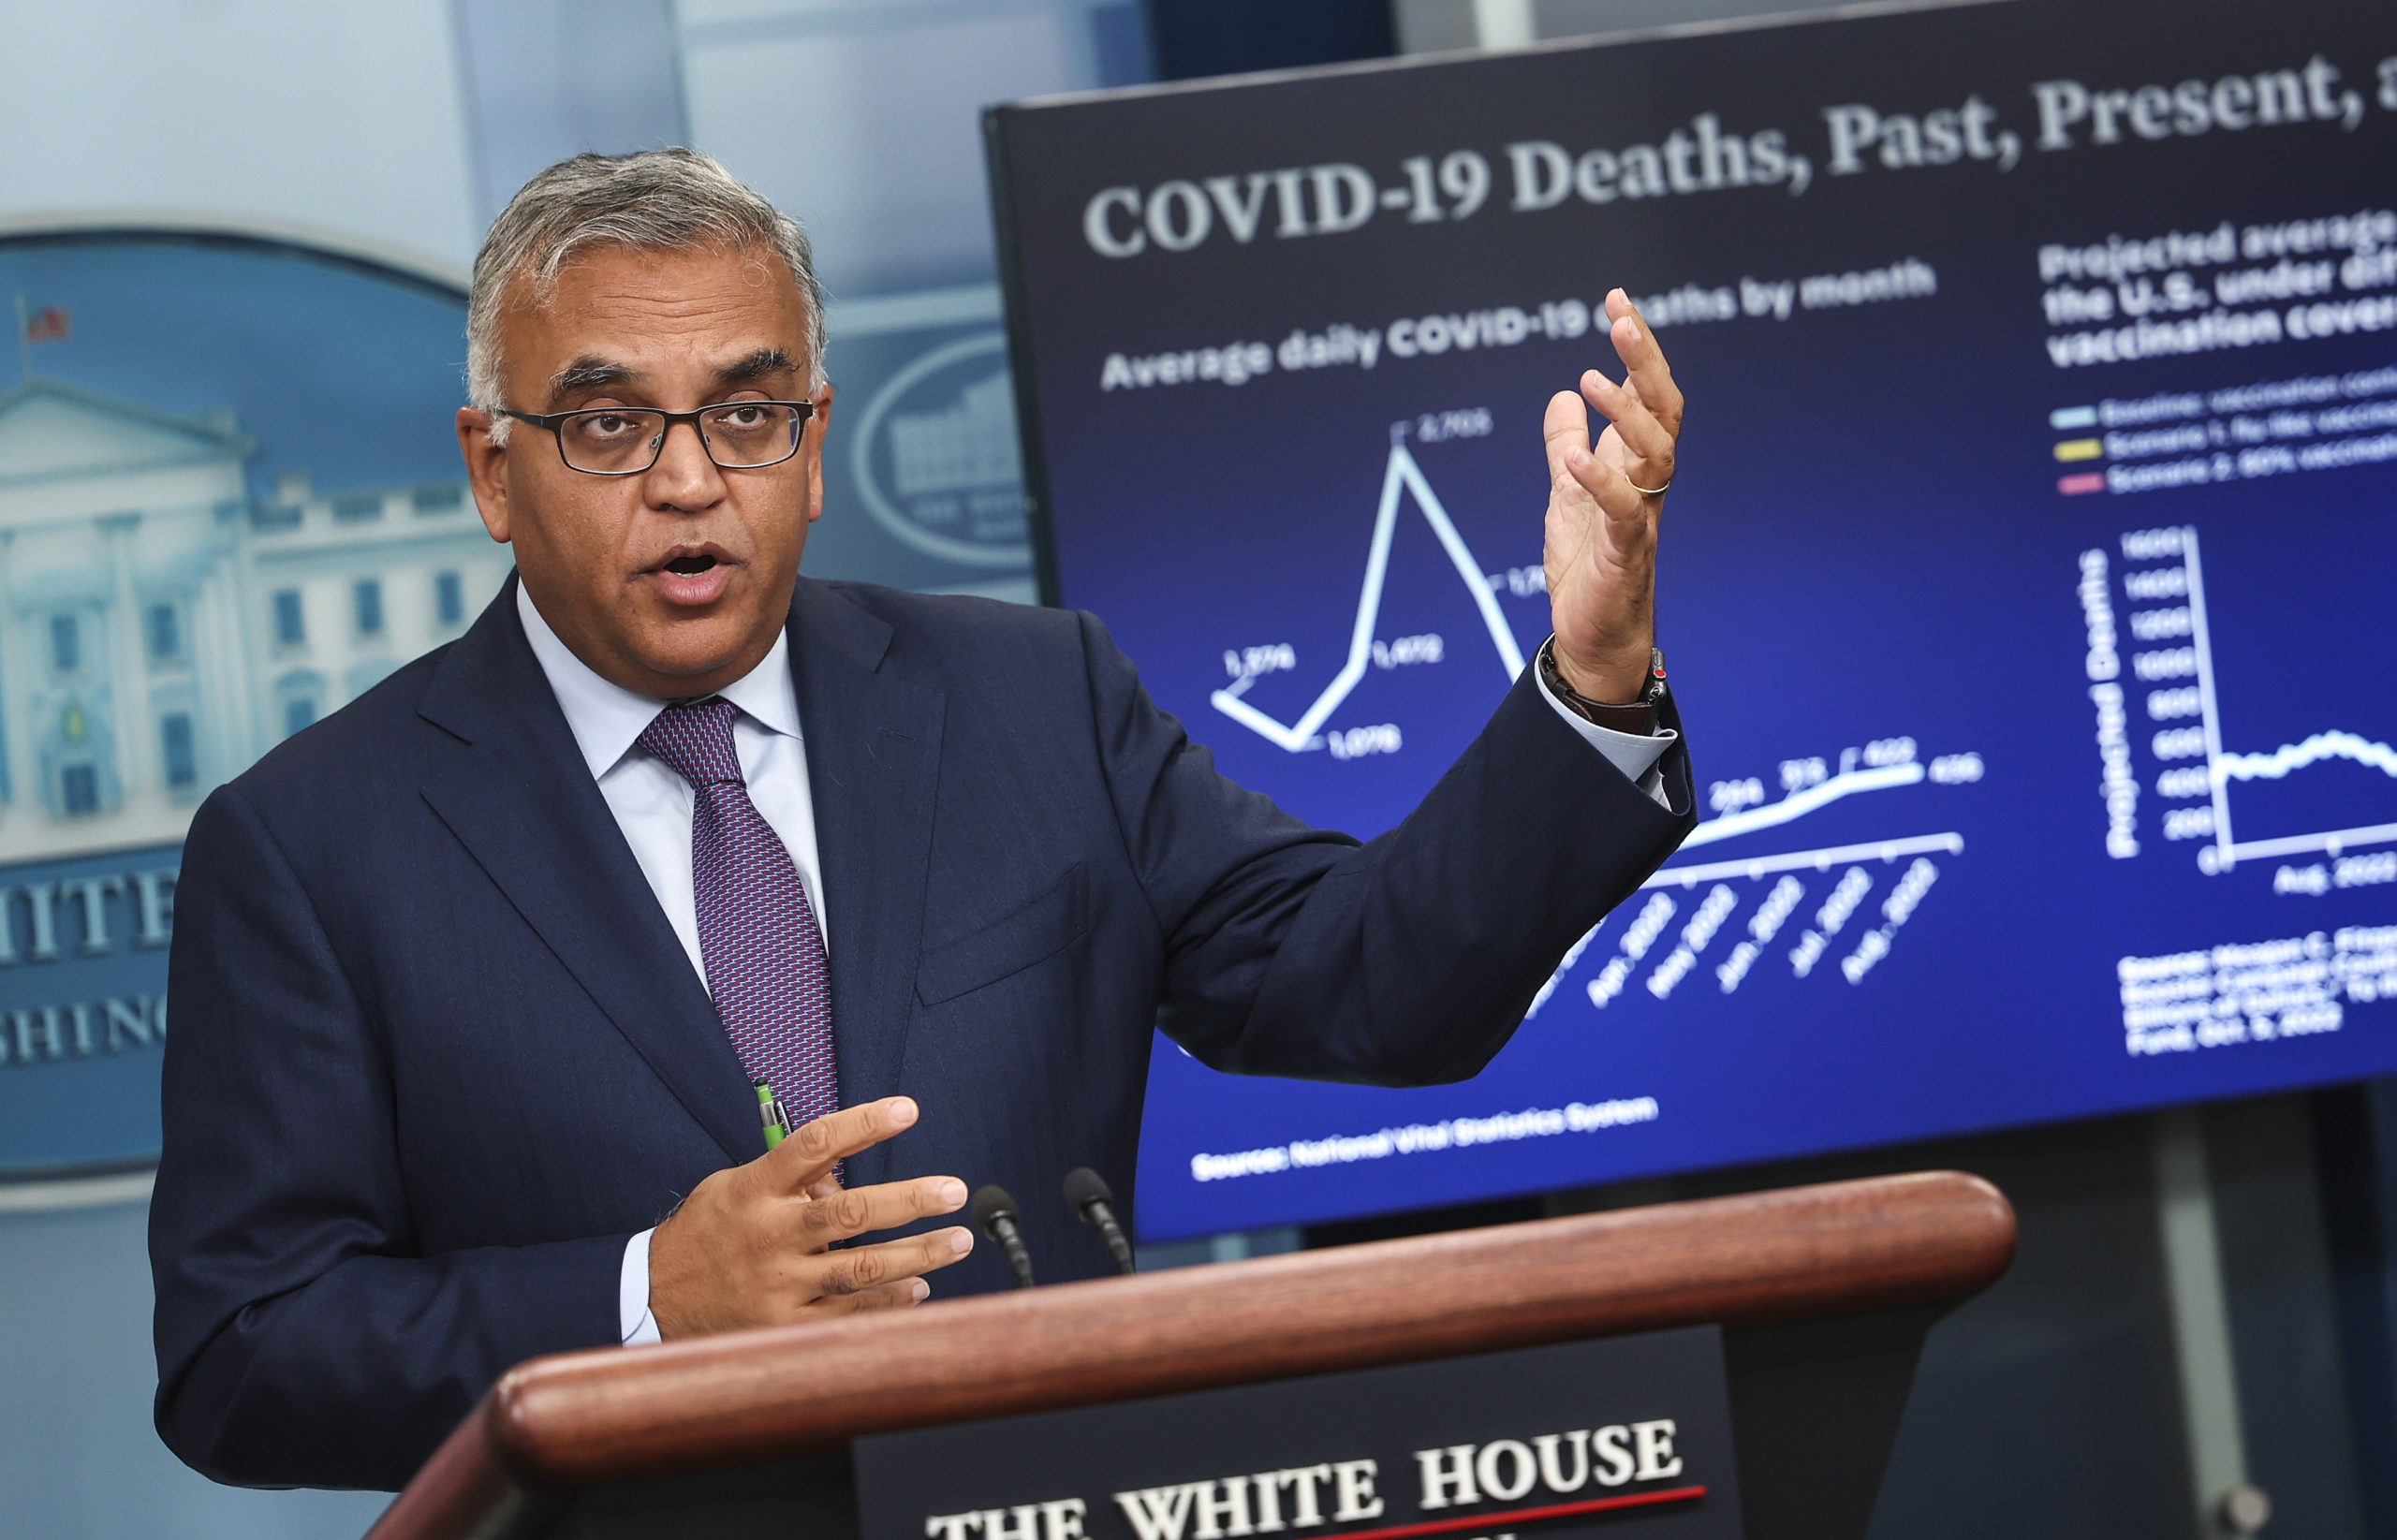 WASHINGTON, DC - OCTOBER 11: White House COVID-19 Response Coordinator Dr. Ashish Jha speaks at the daily press briefing at the White House on October 11, 2022 in Washington, DC. (Photo by Kevin Dietsch/Getty Images)